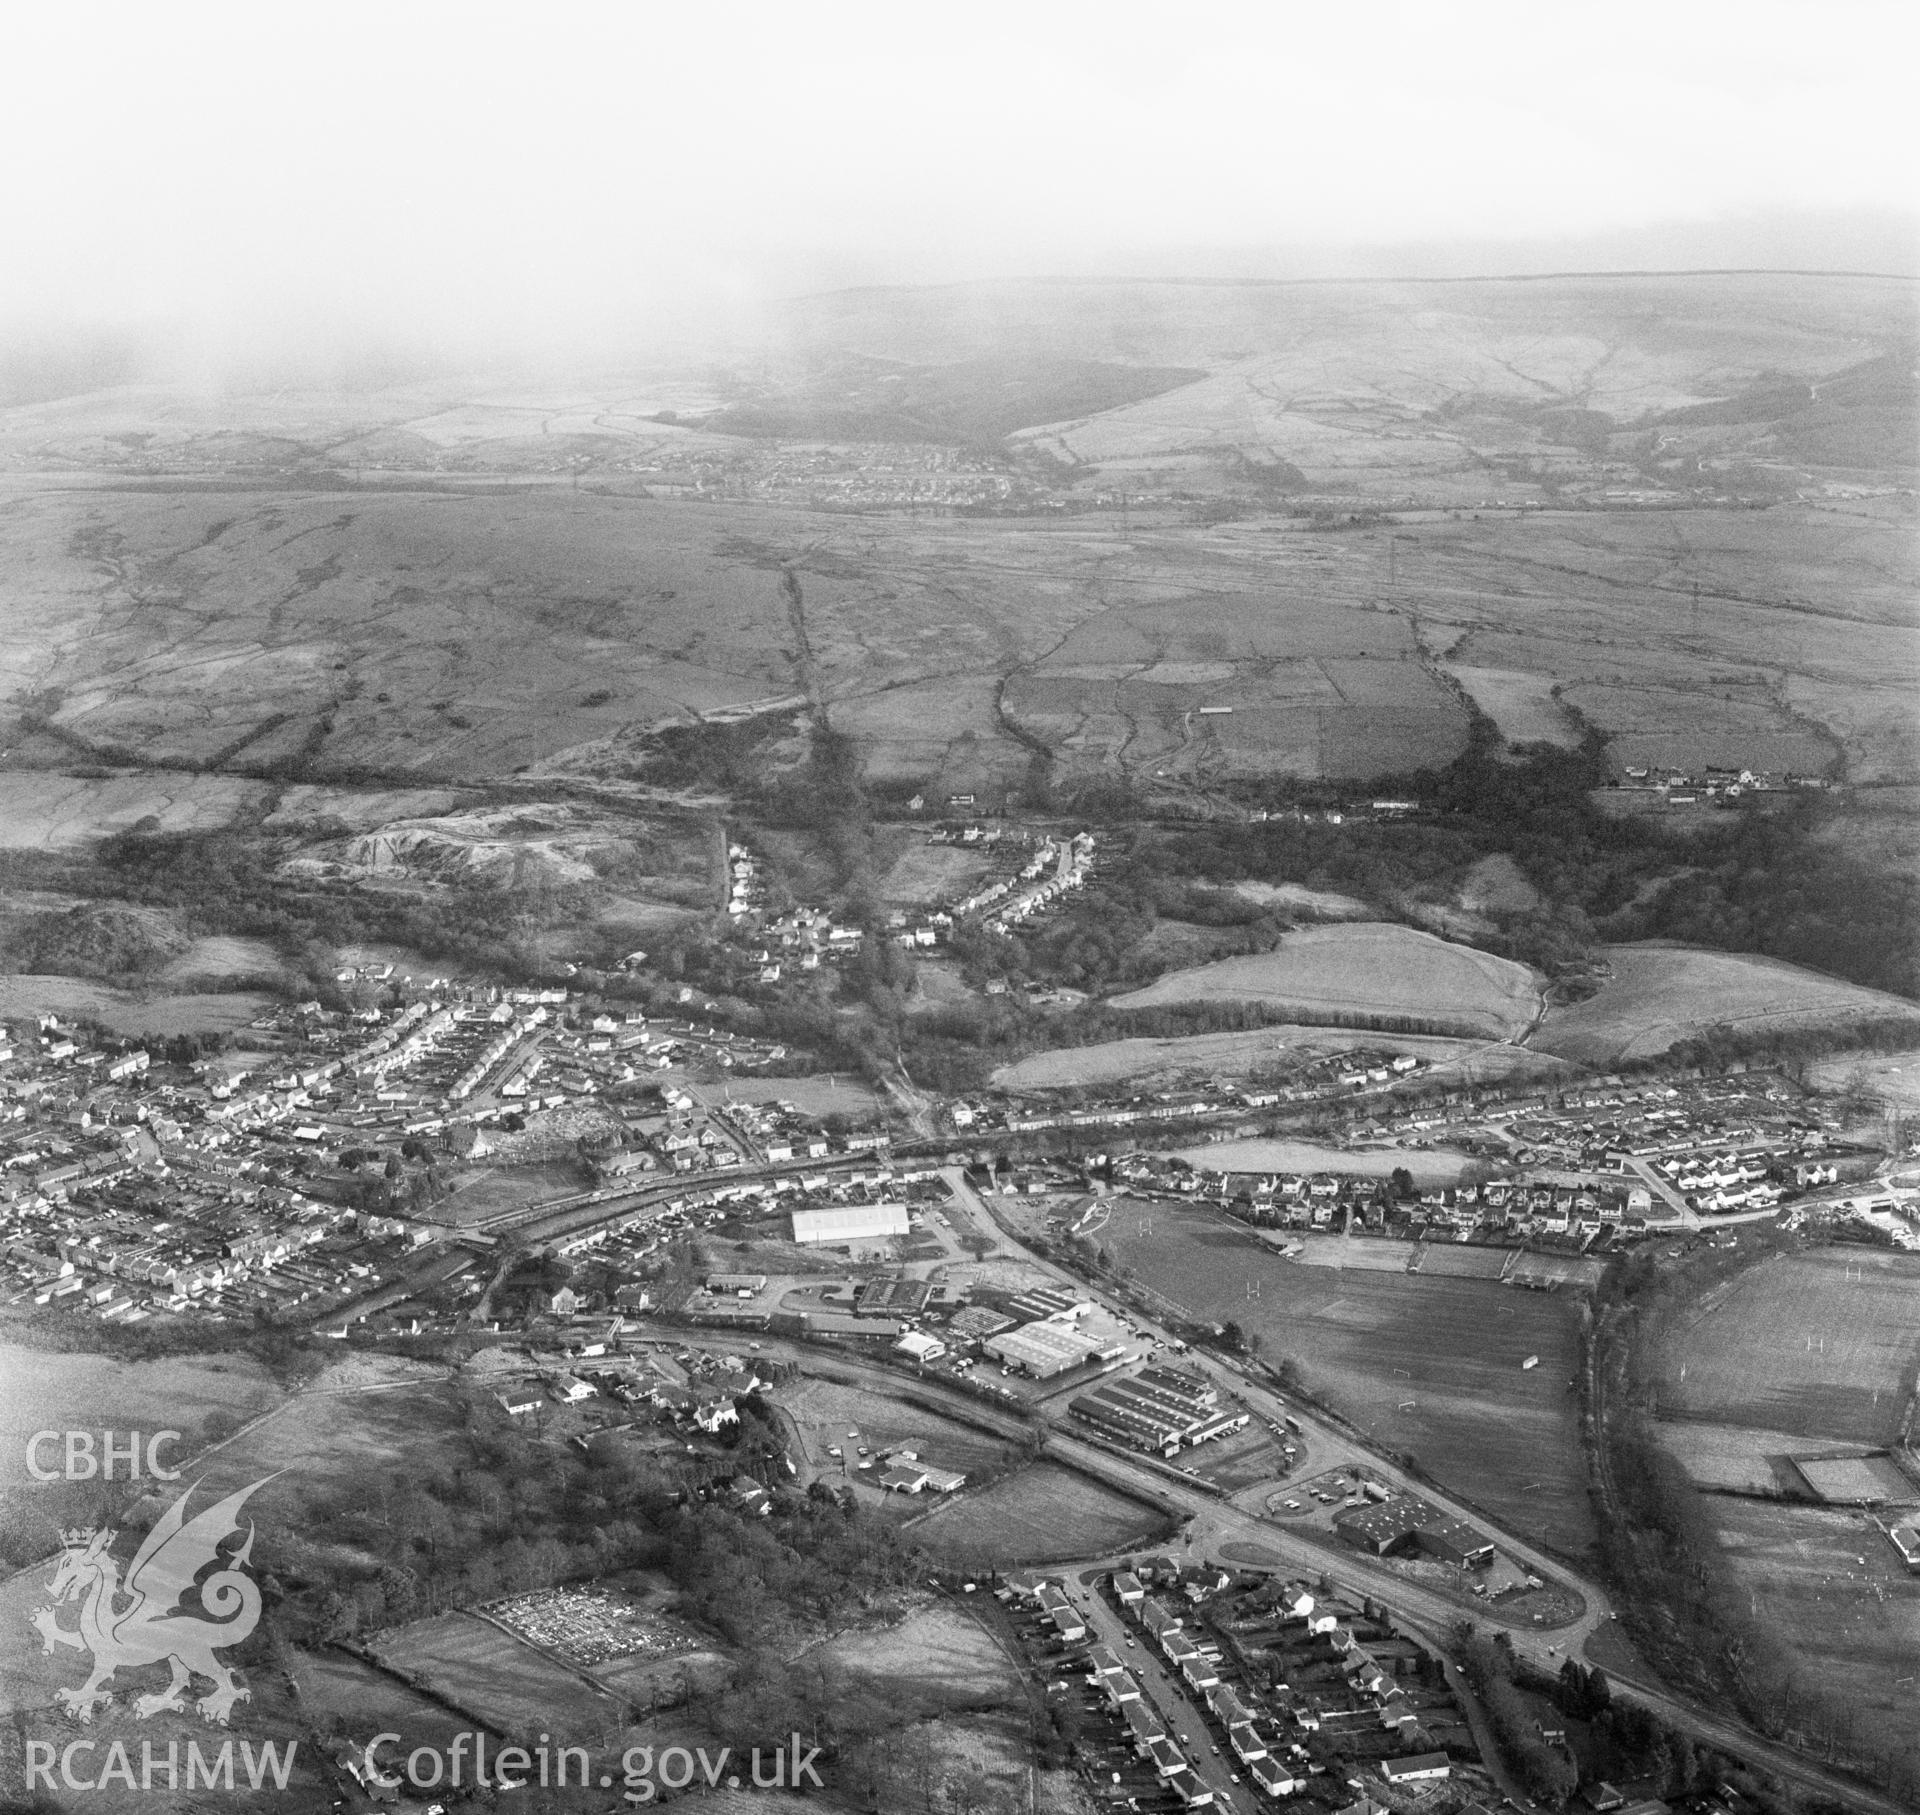 RCAHMW Black and white oblique aerial photograph of Claypon's Tramroad, Ystradgynlais, taken by CR Musson on 20/01/88